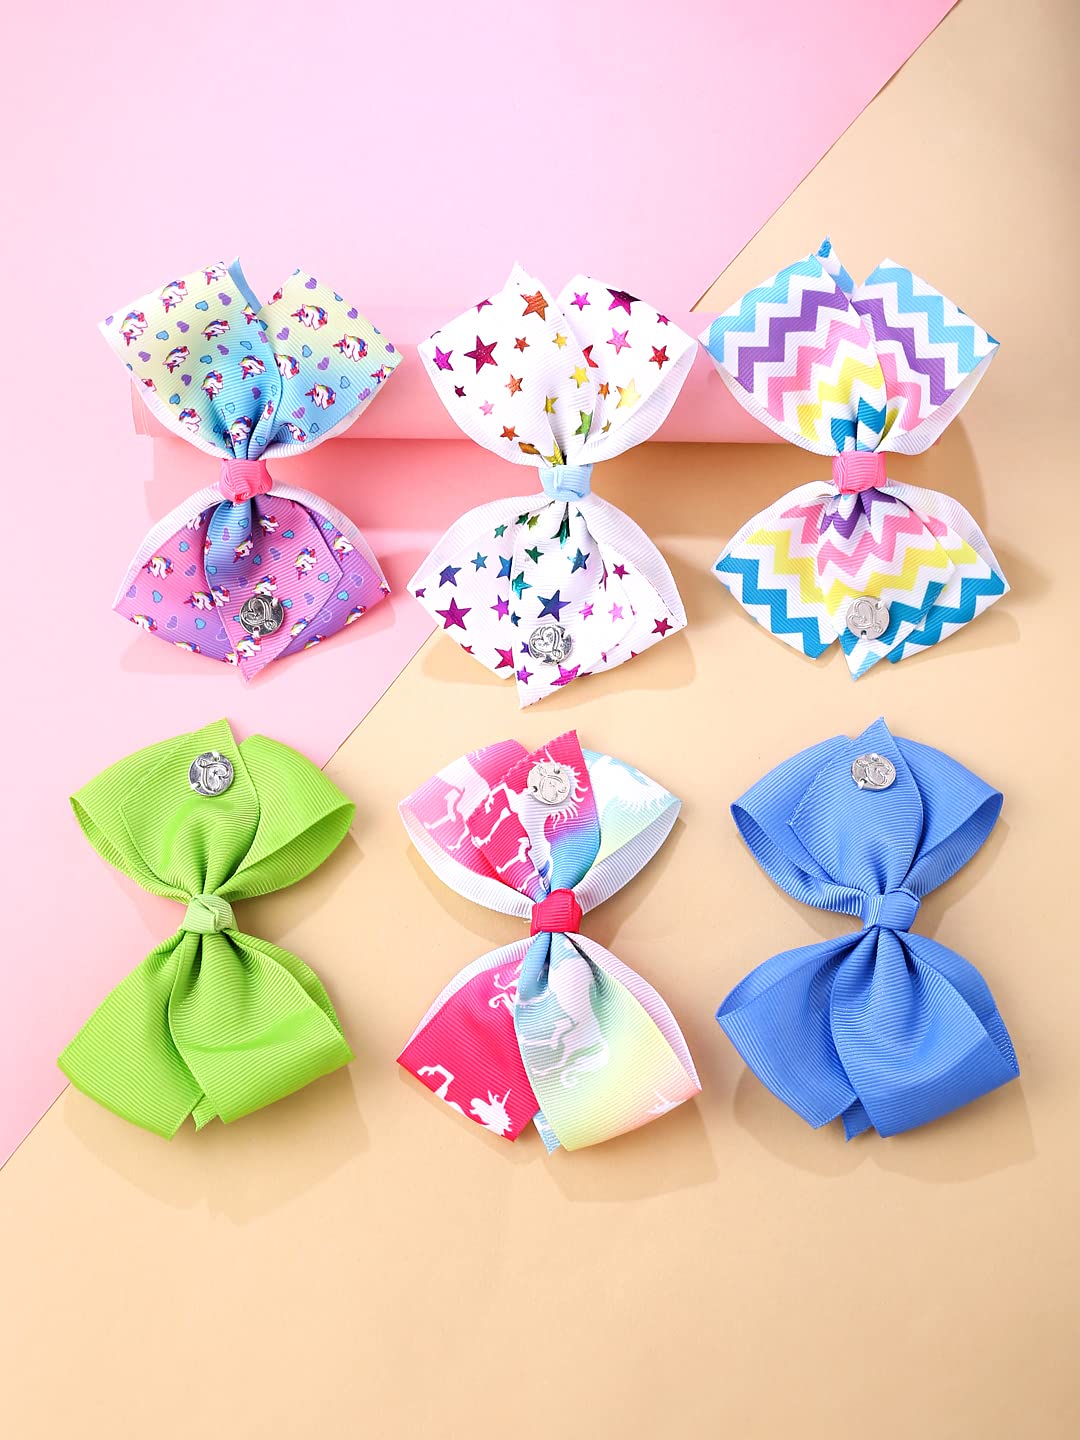 Melbees by Yellow Chimes Hair Clips for Girls Kids Hair Accessories for Girls Hair Clip Alligator Clips Set of 6 PCS Multicolor Cute Bow Hair Clips for Baby Girls Baby Hair Clips For Kids Toddlers